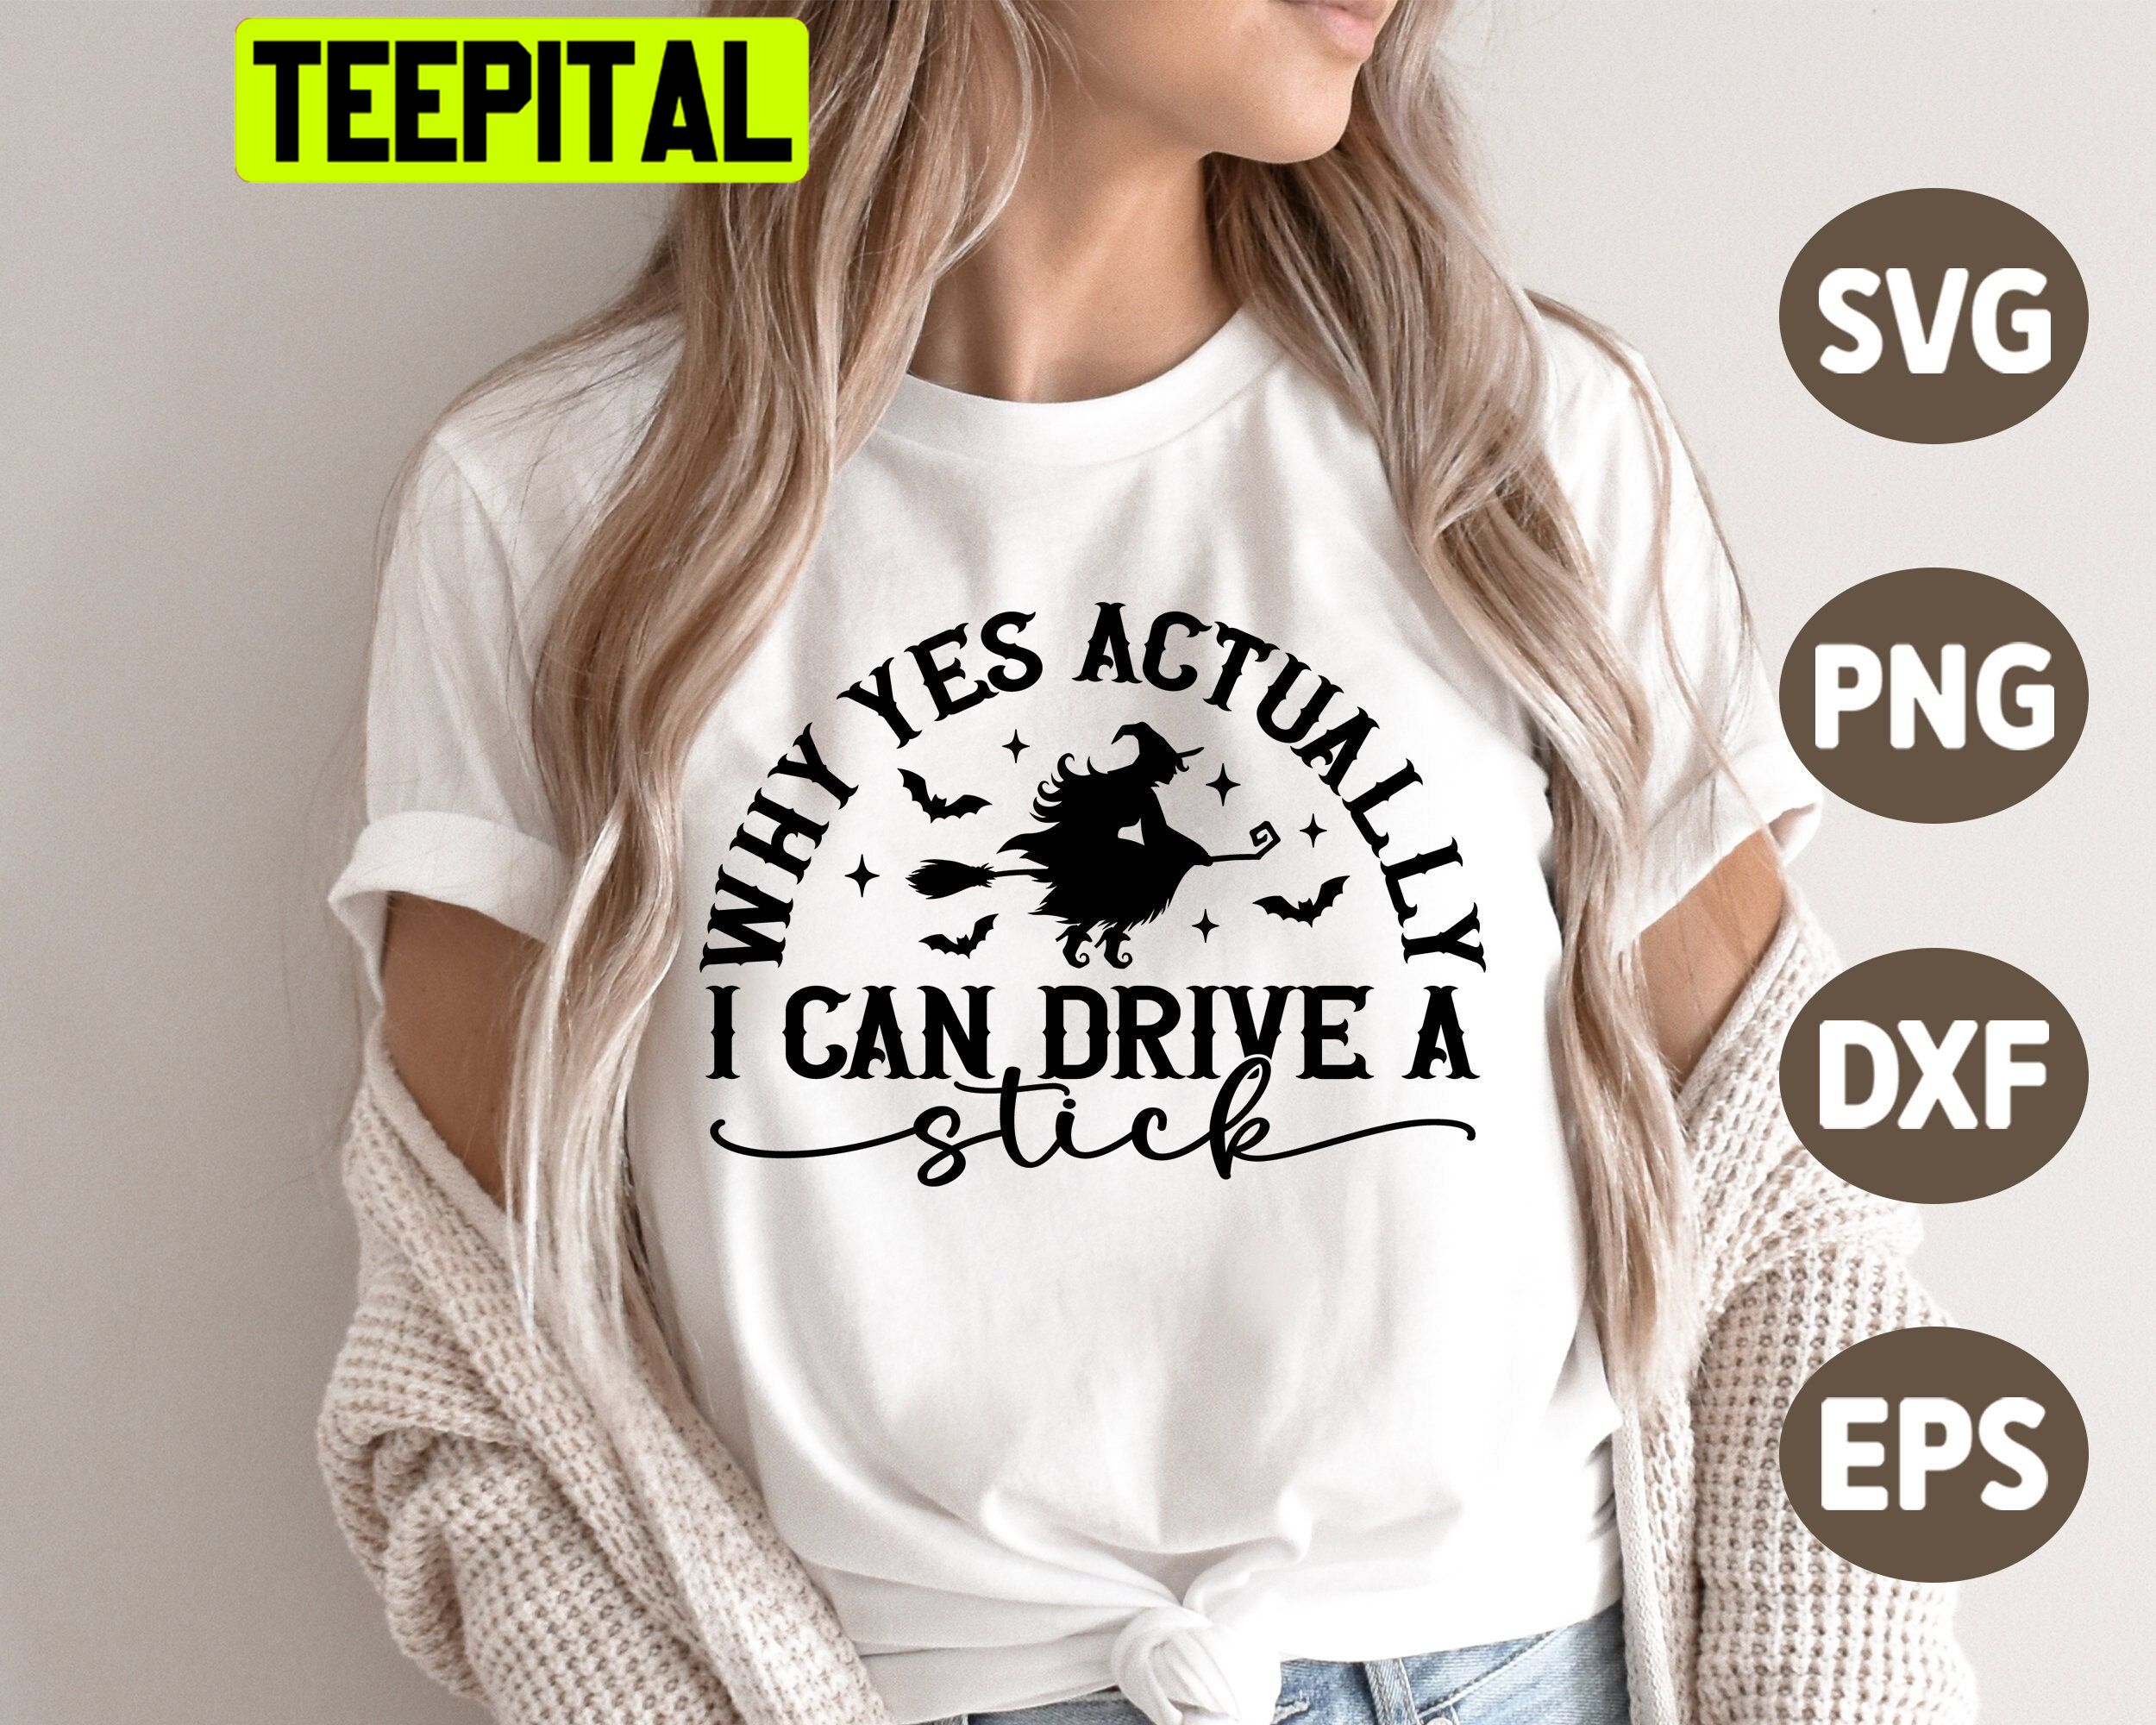 Why Yes Actually I Can Drive A Stick Halloween Quote HalloweenTrending Unisex Shirt